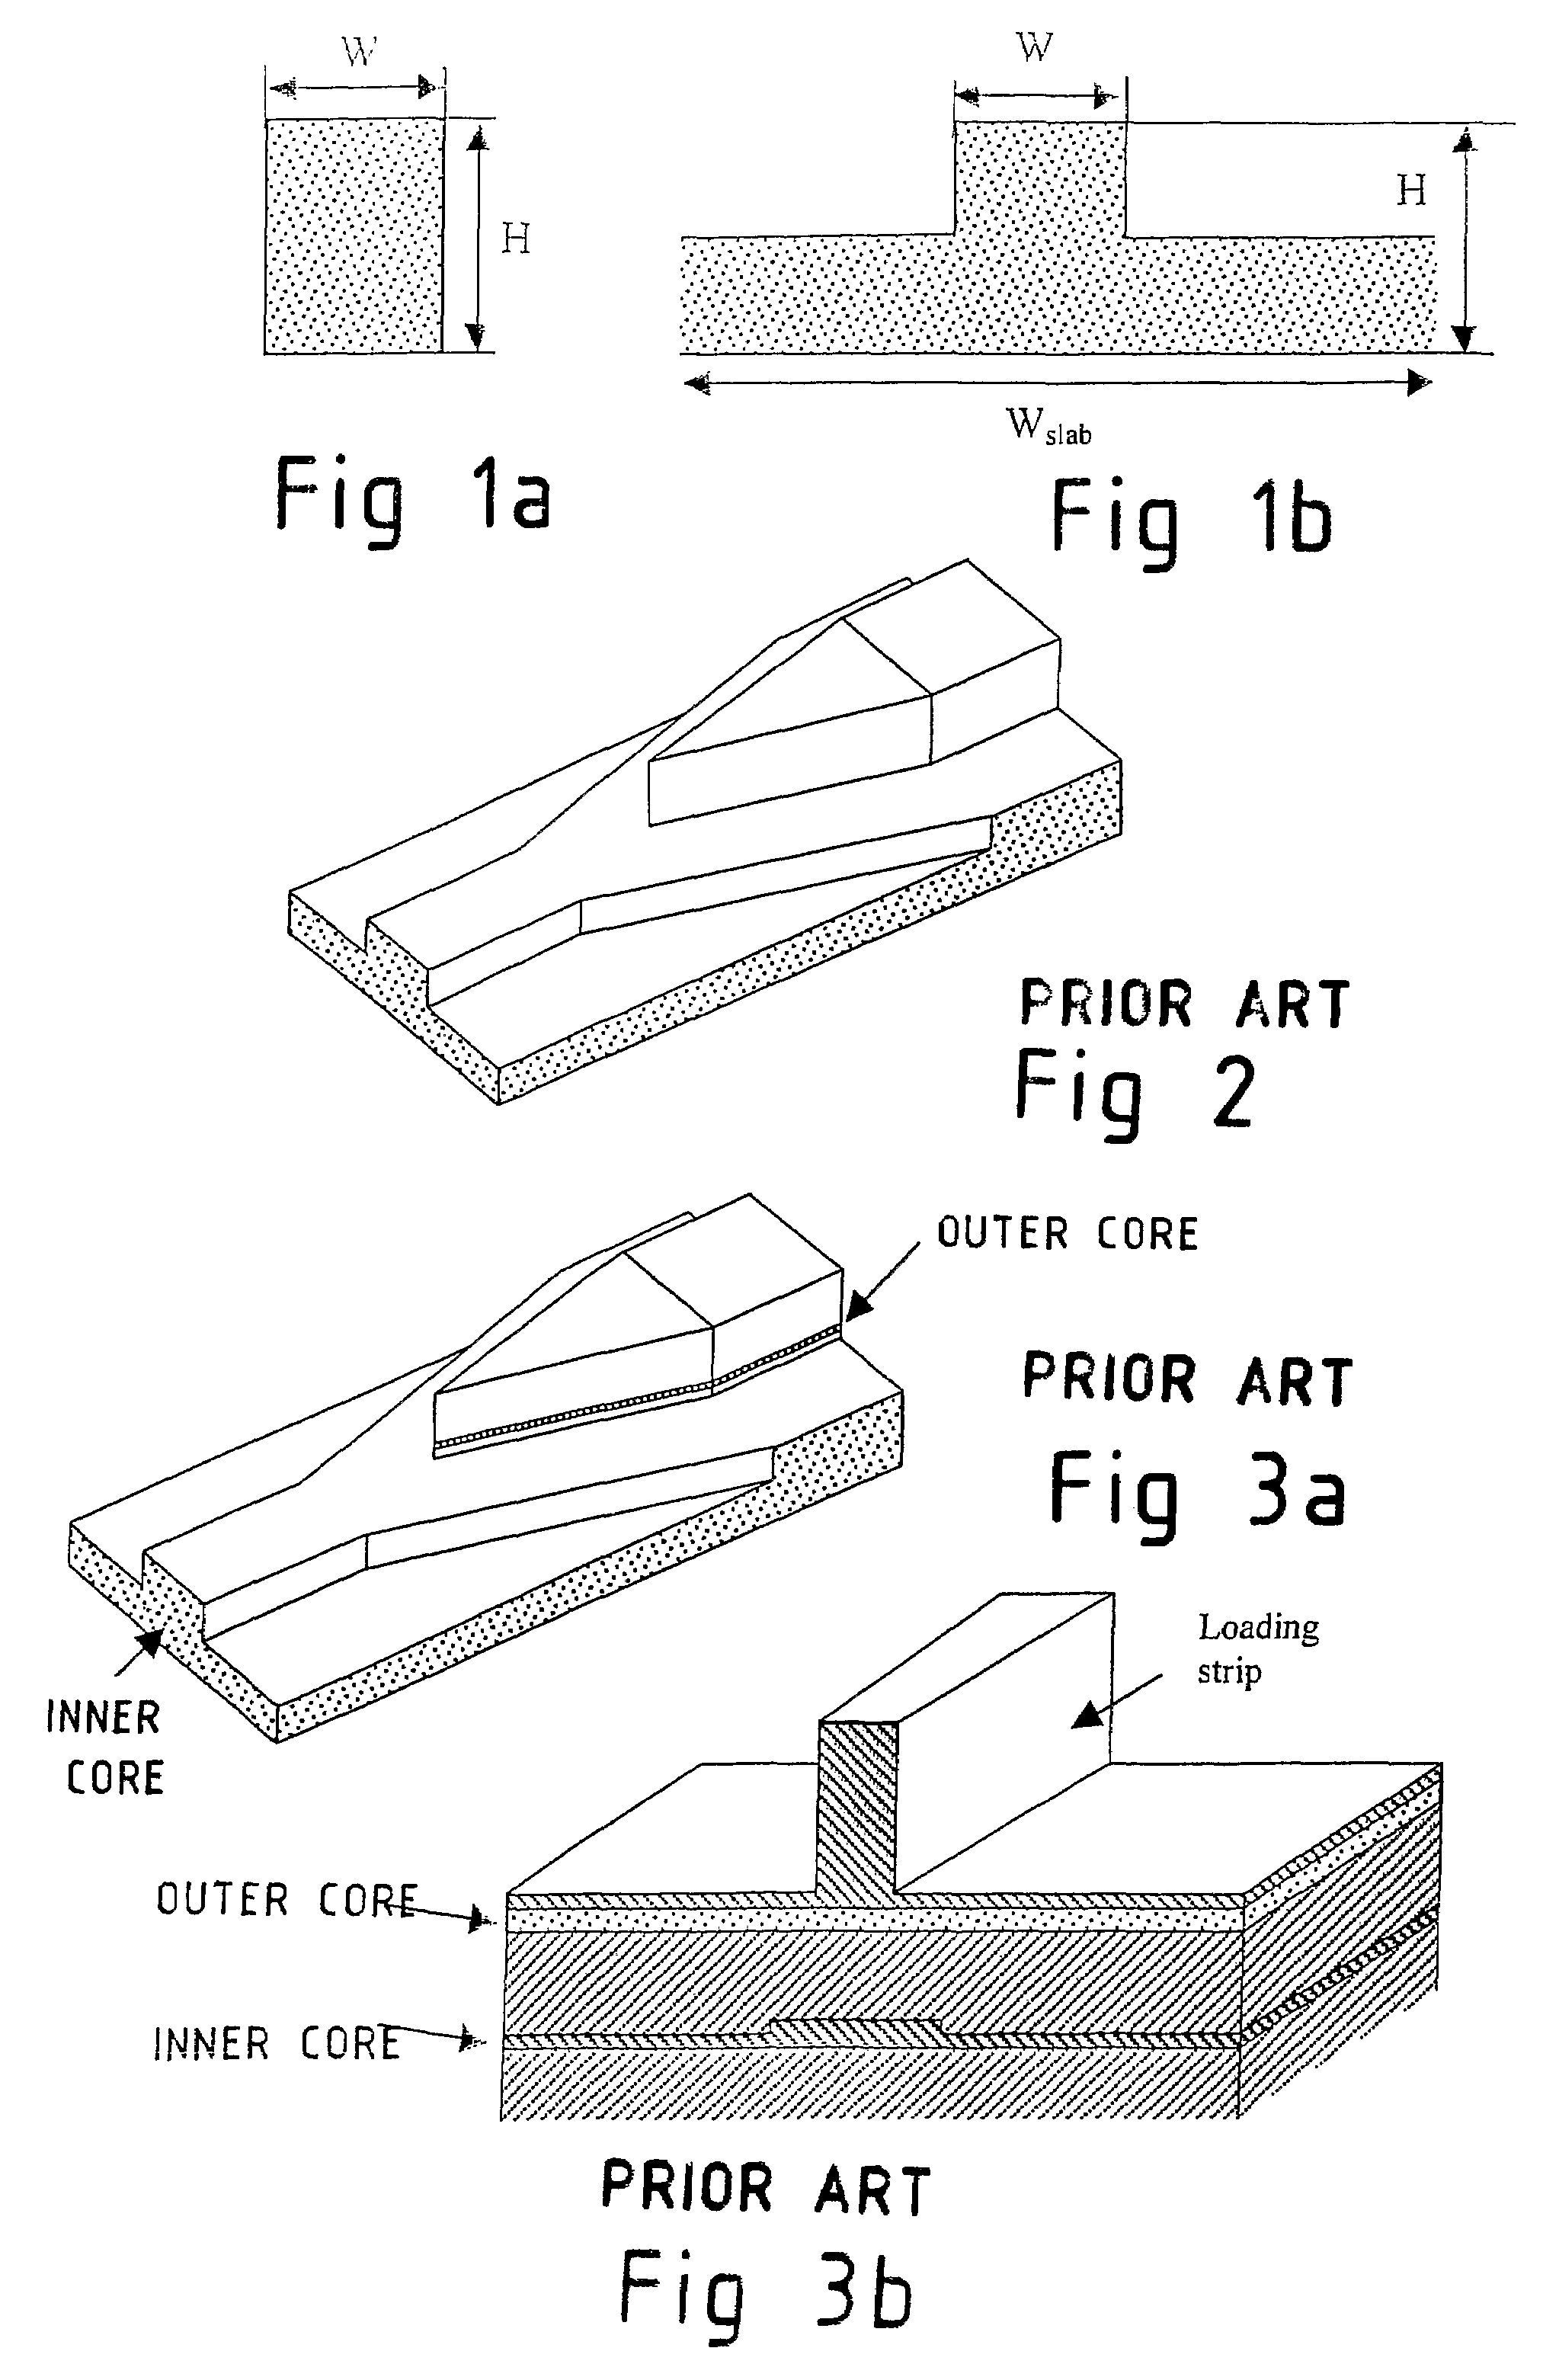 Structure comprising an adiabatic coupler for adiabatic coupling of light between two optical waveguides and method for manufacturing such a structure